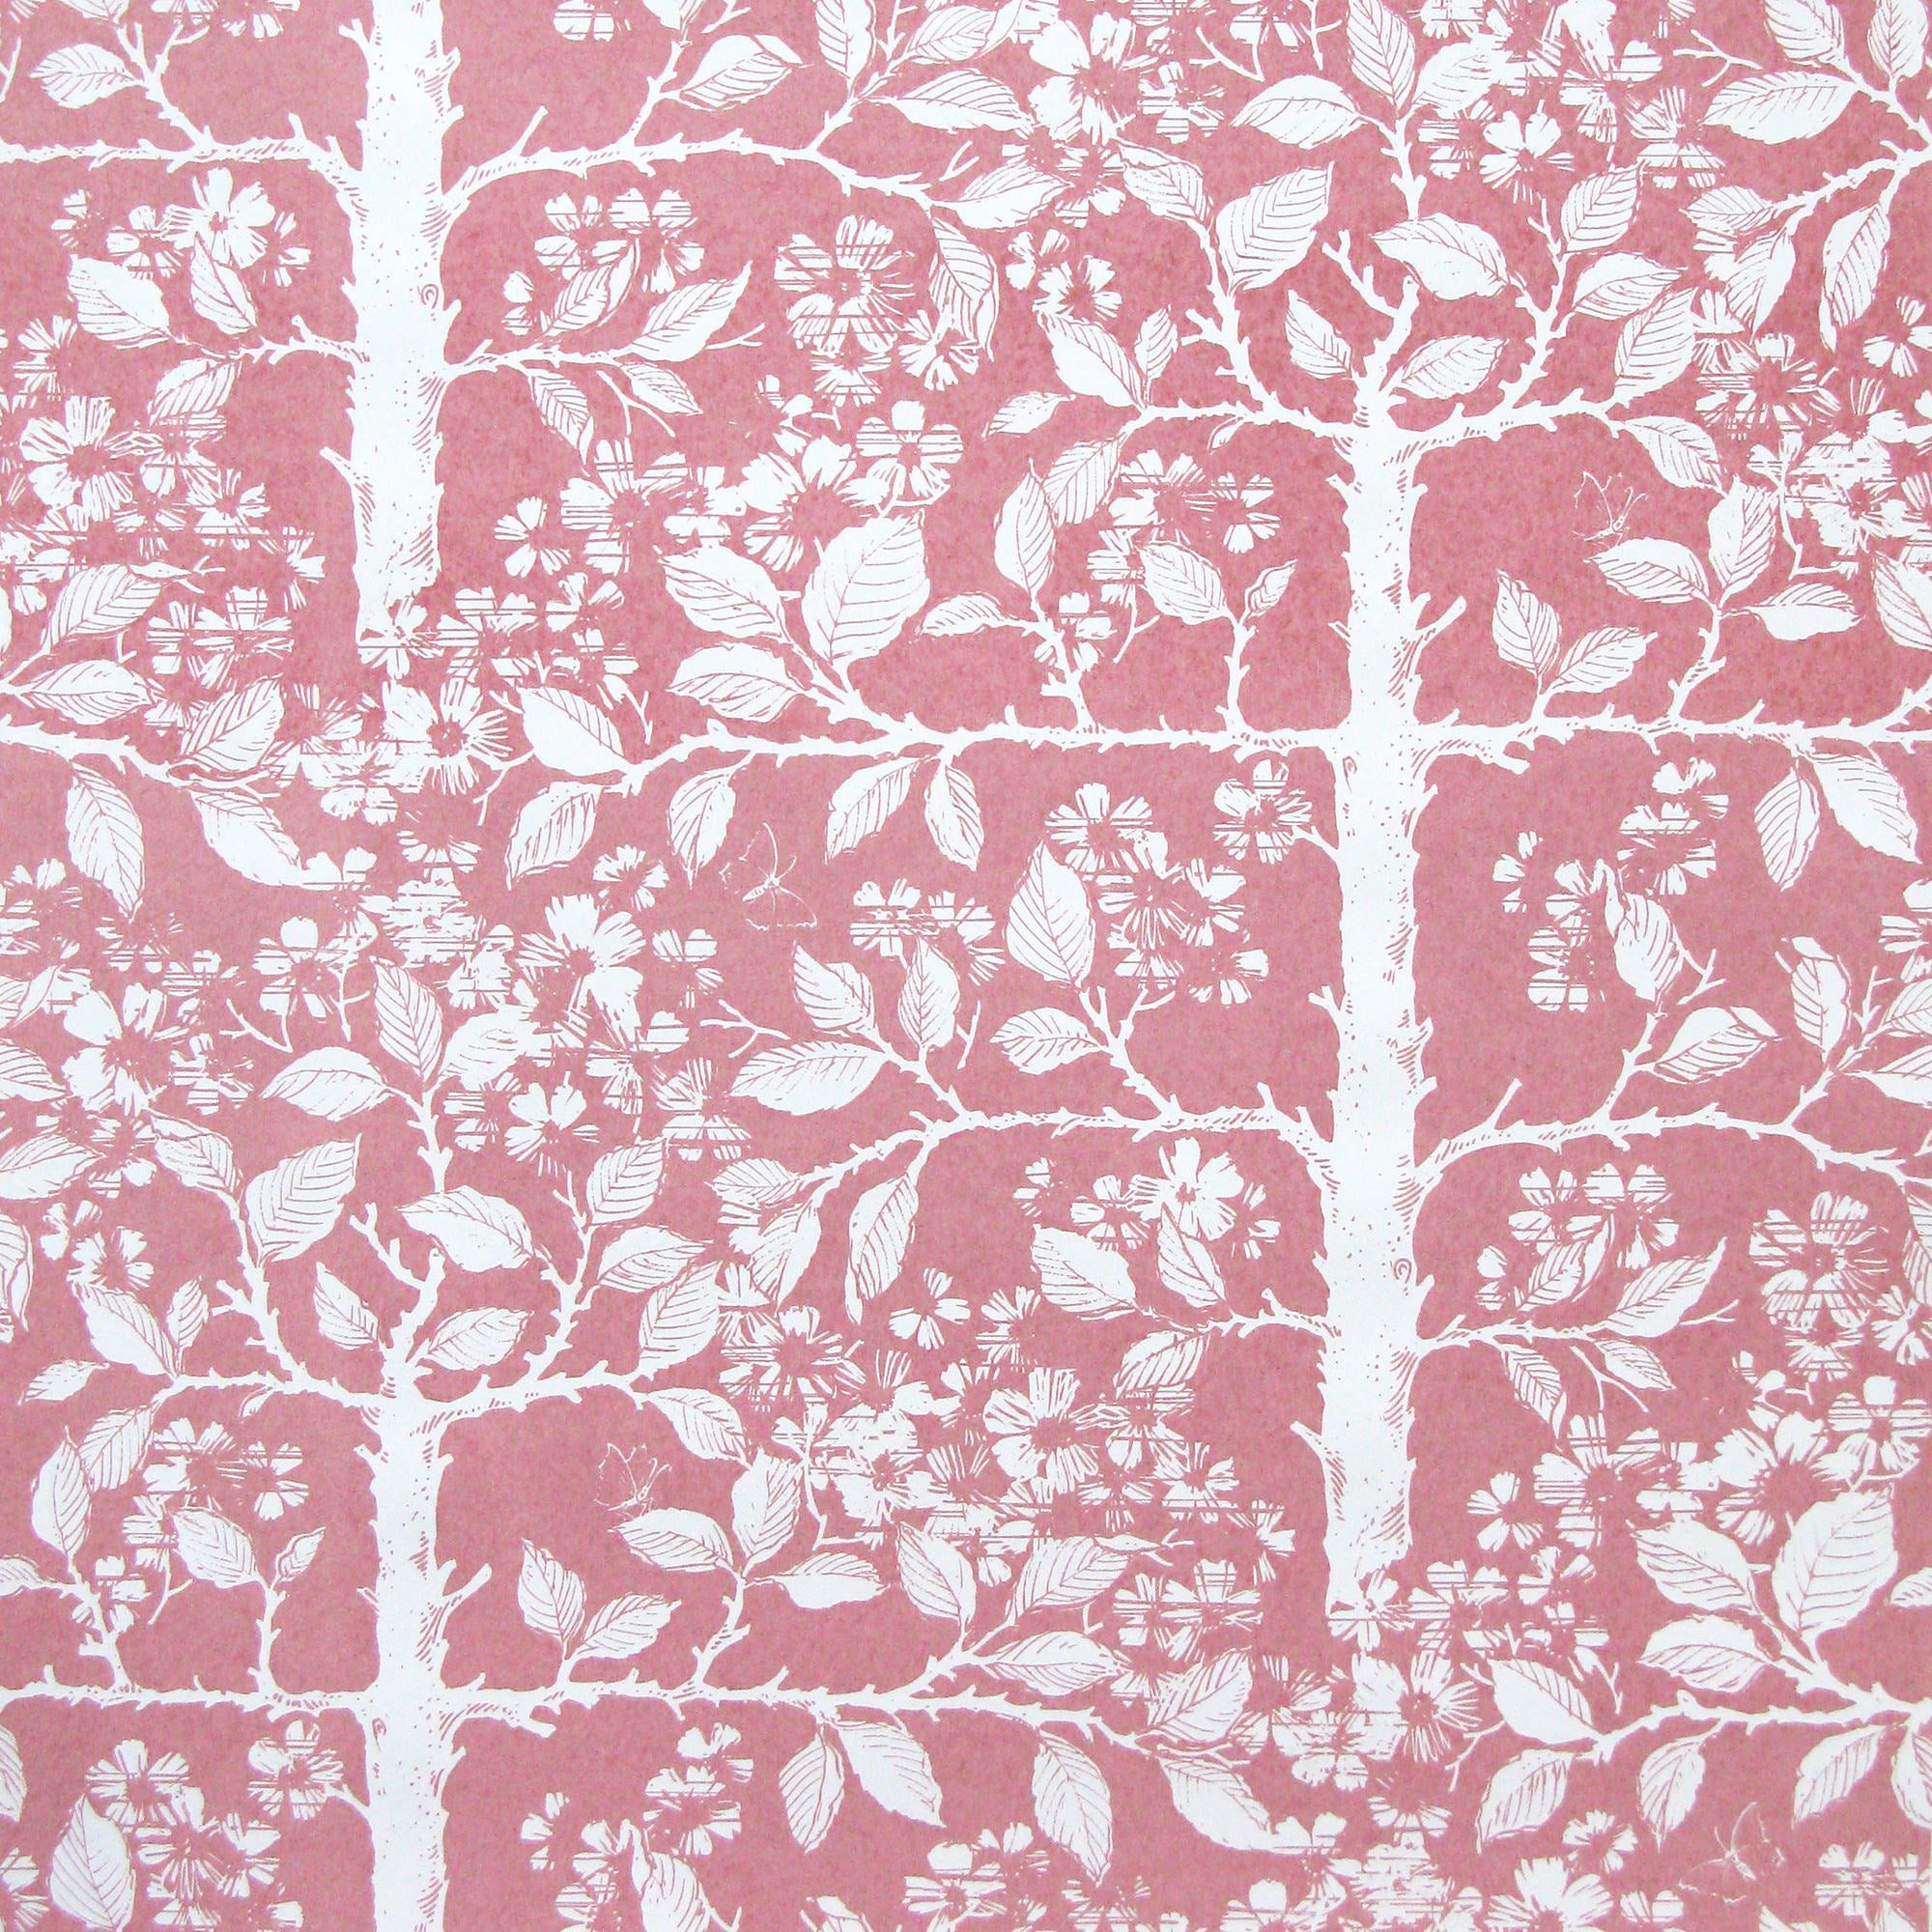 Detail of wallpaper in a large-scale tree and leaf print in white on a light rose field.